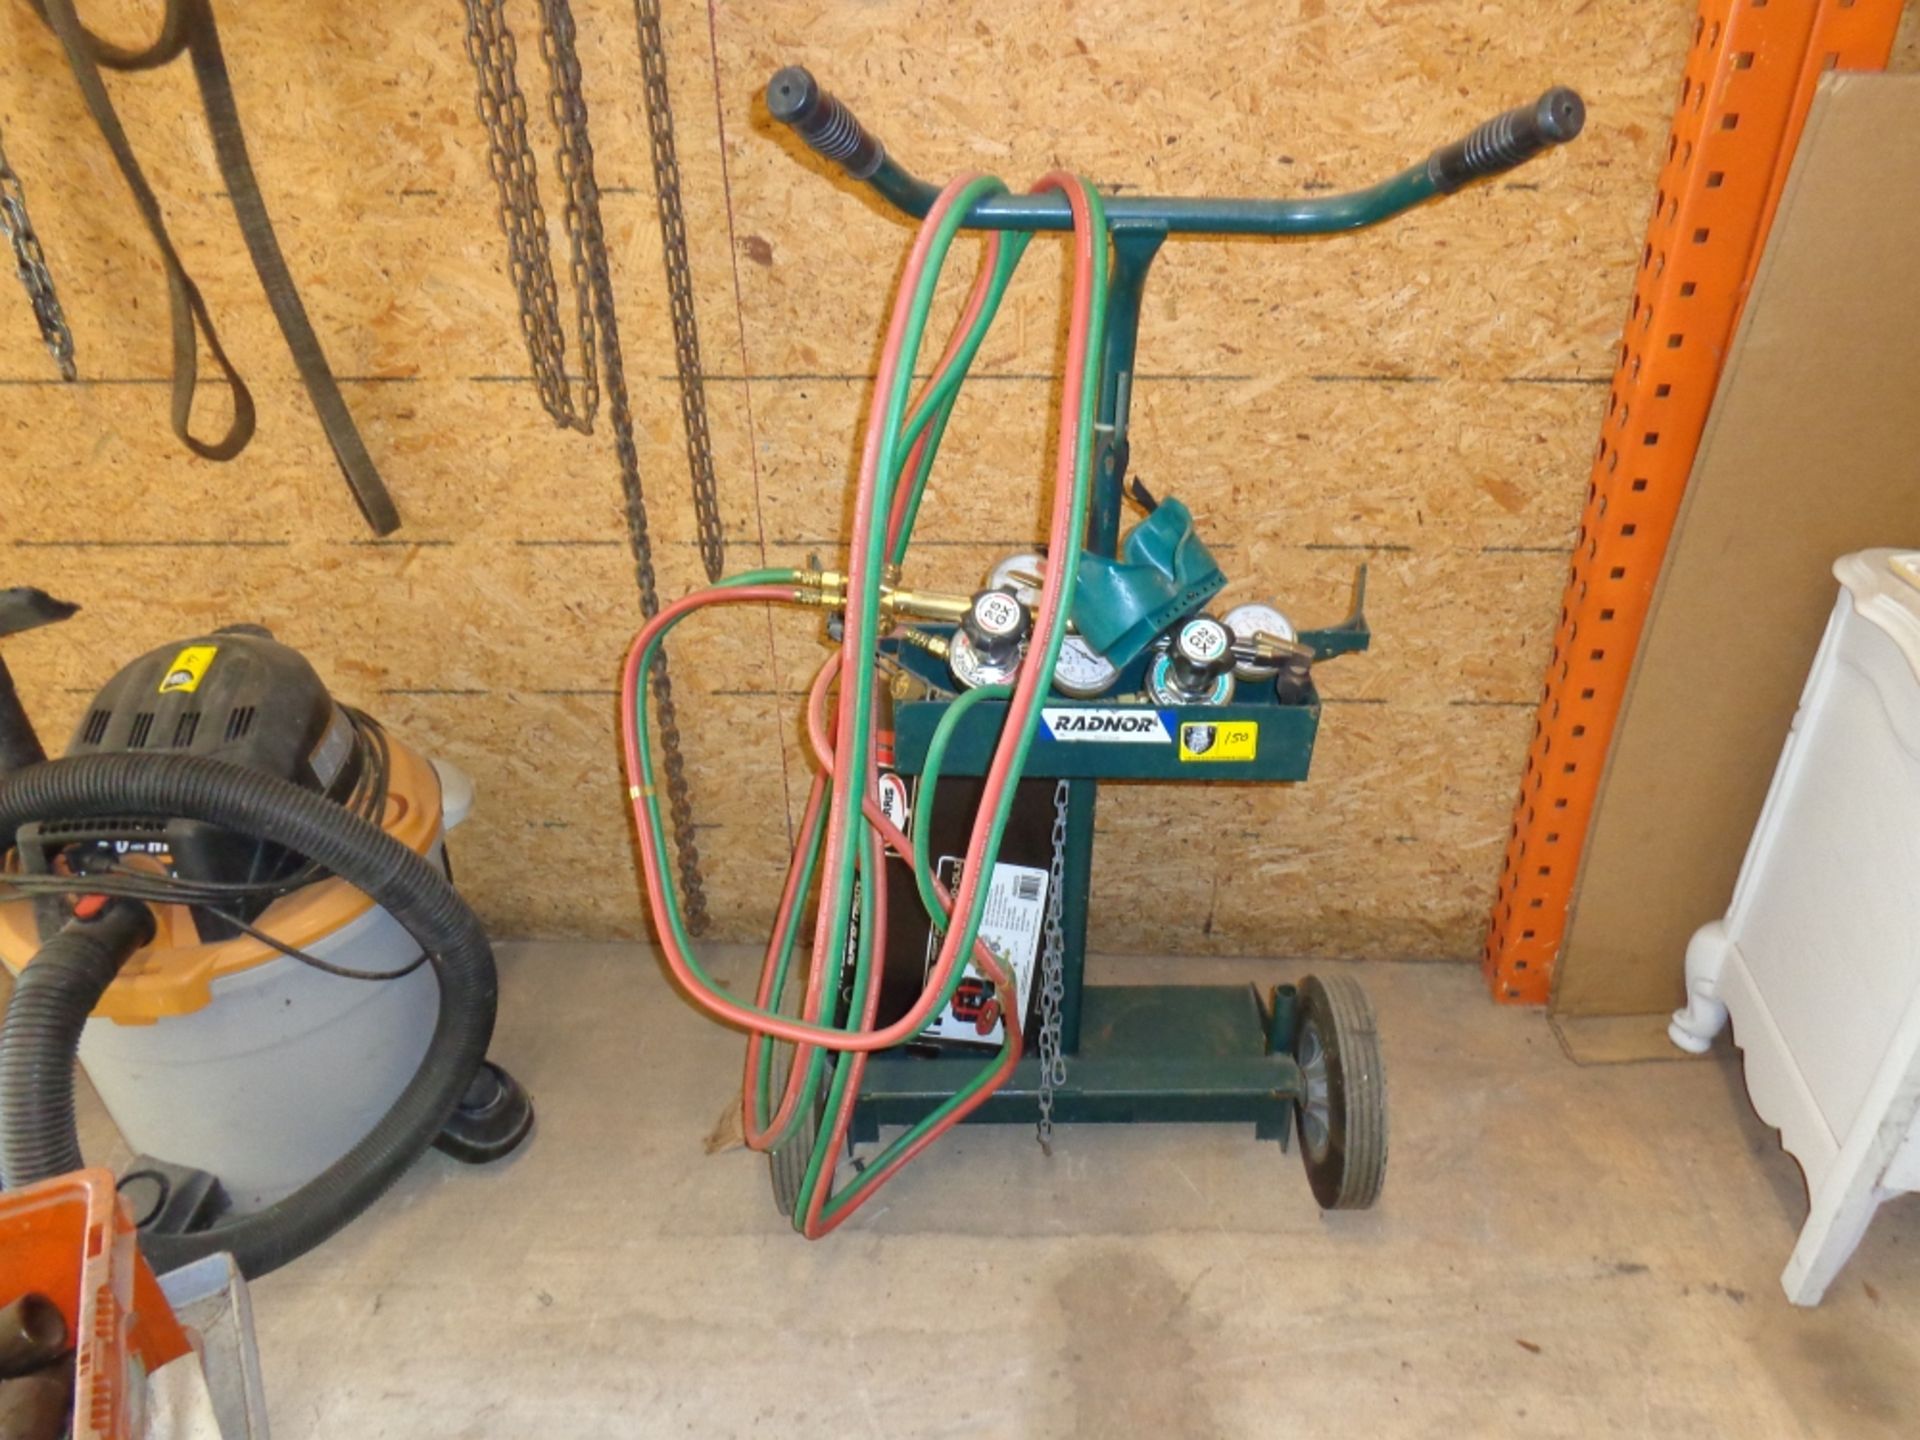 HARRIS ACETYLENE TORCHES AND CART